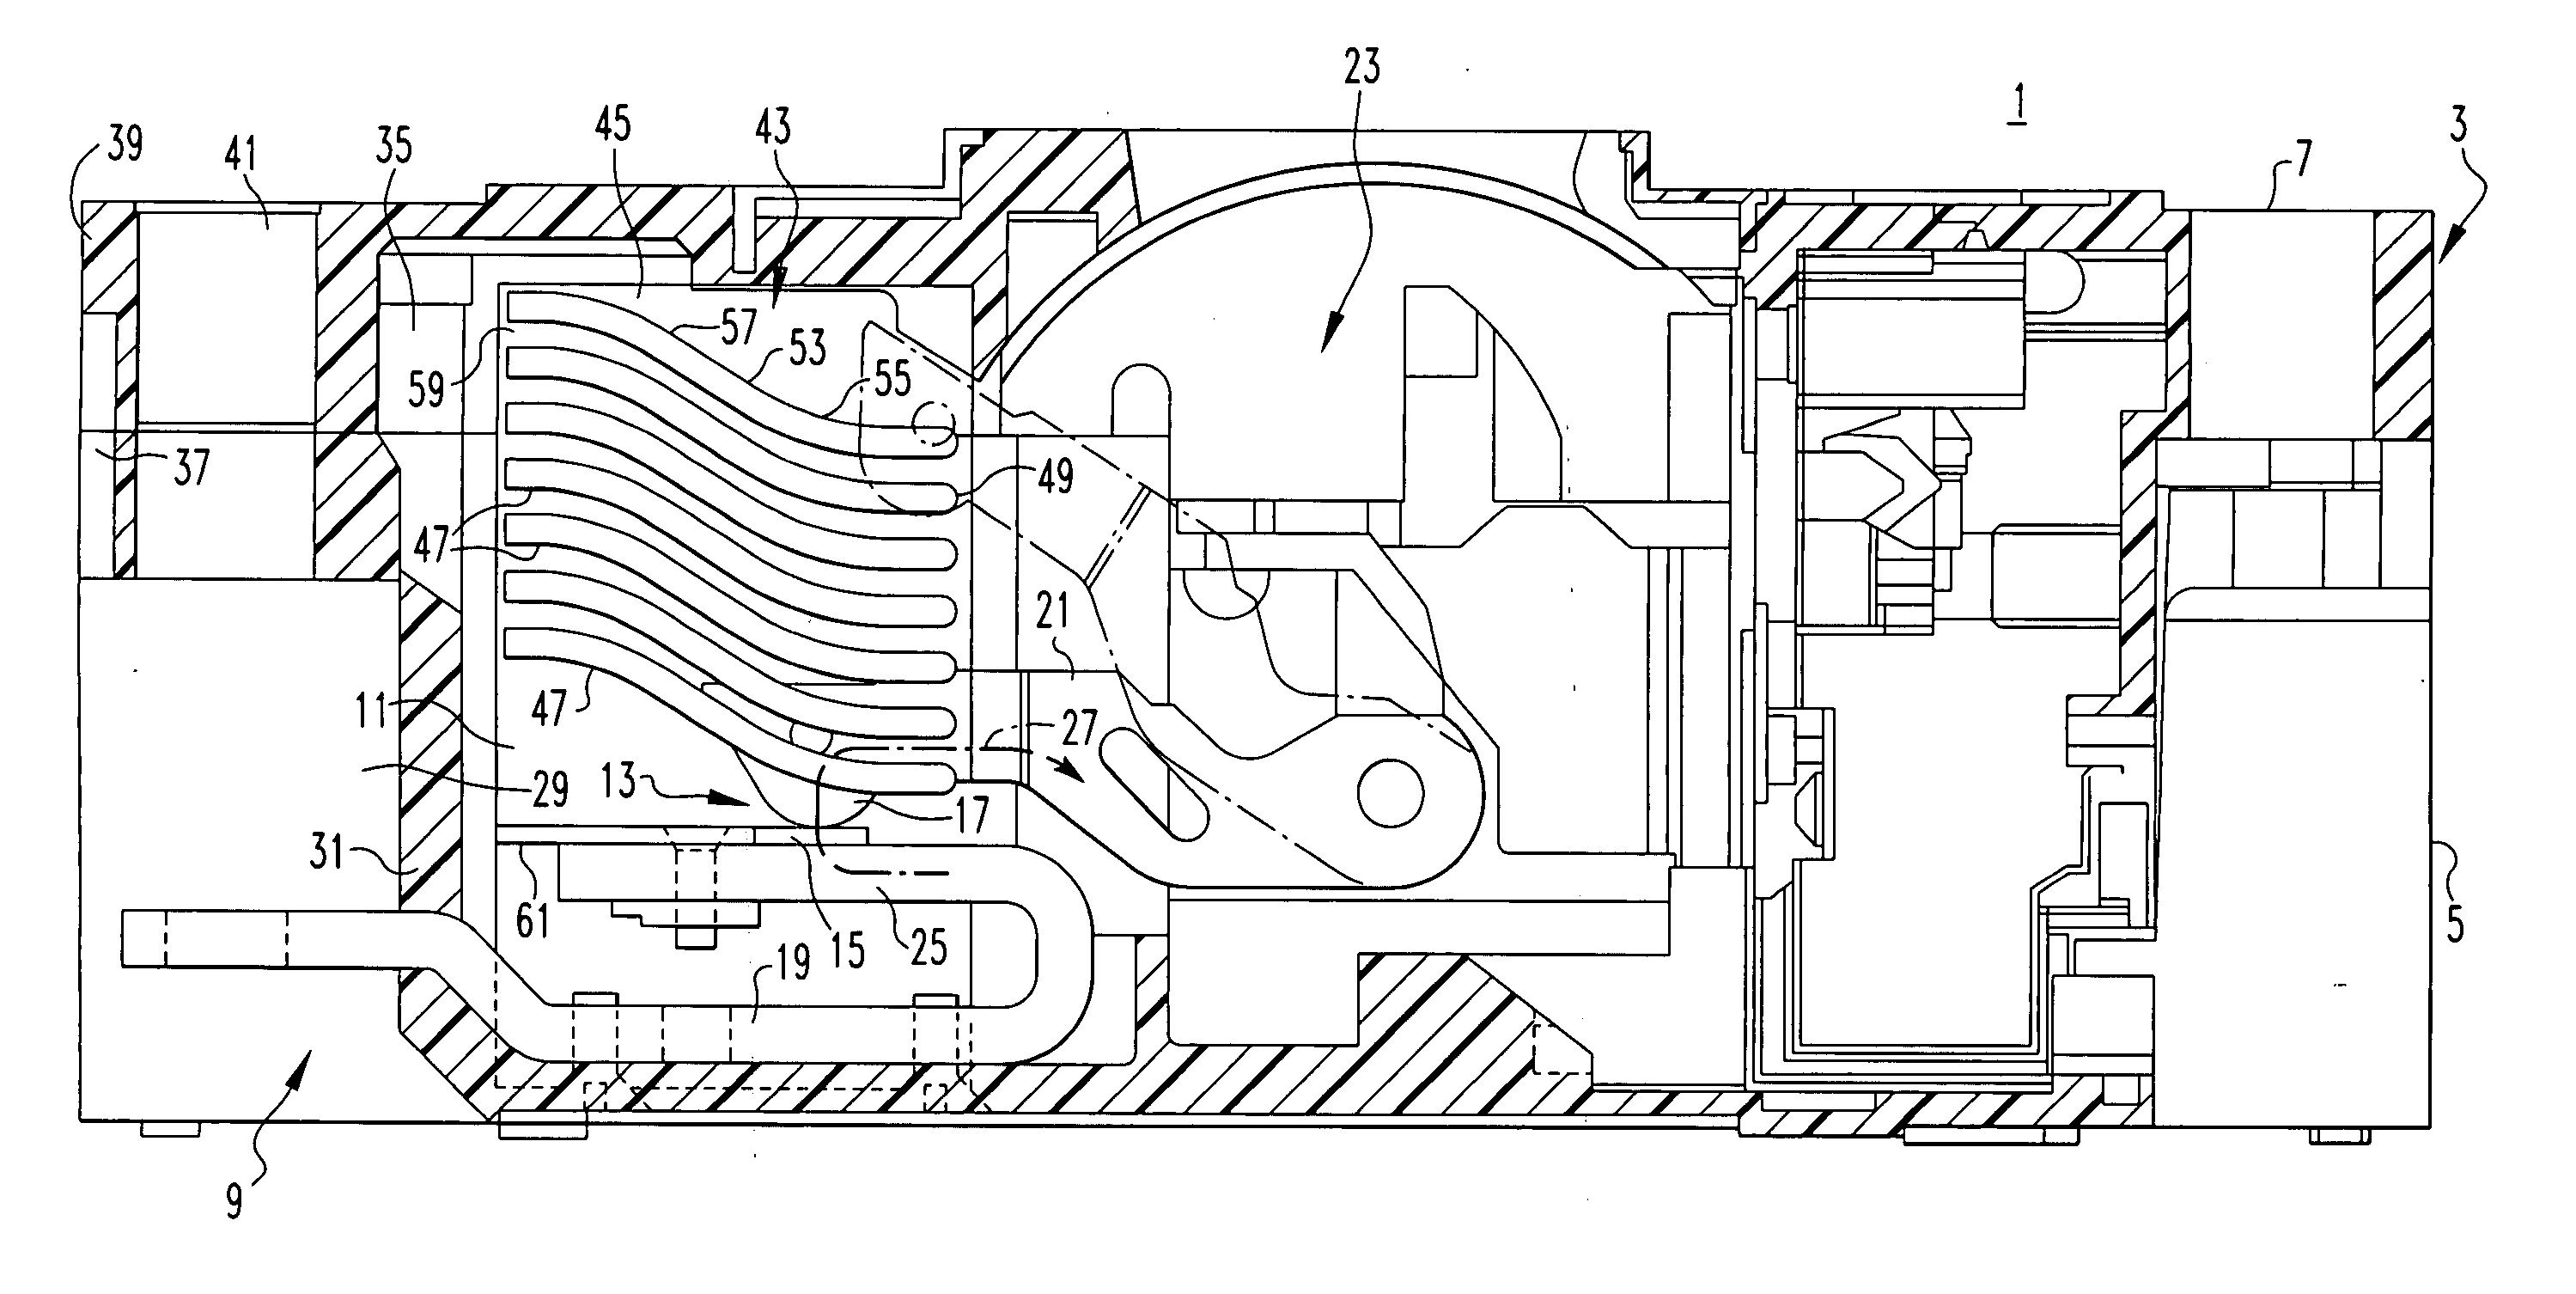 ARC chute assembly and electric power switch incorporating same